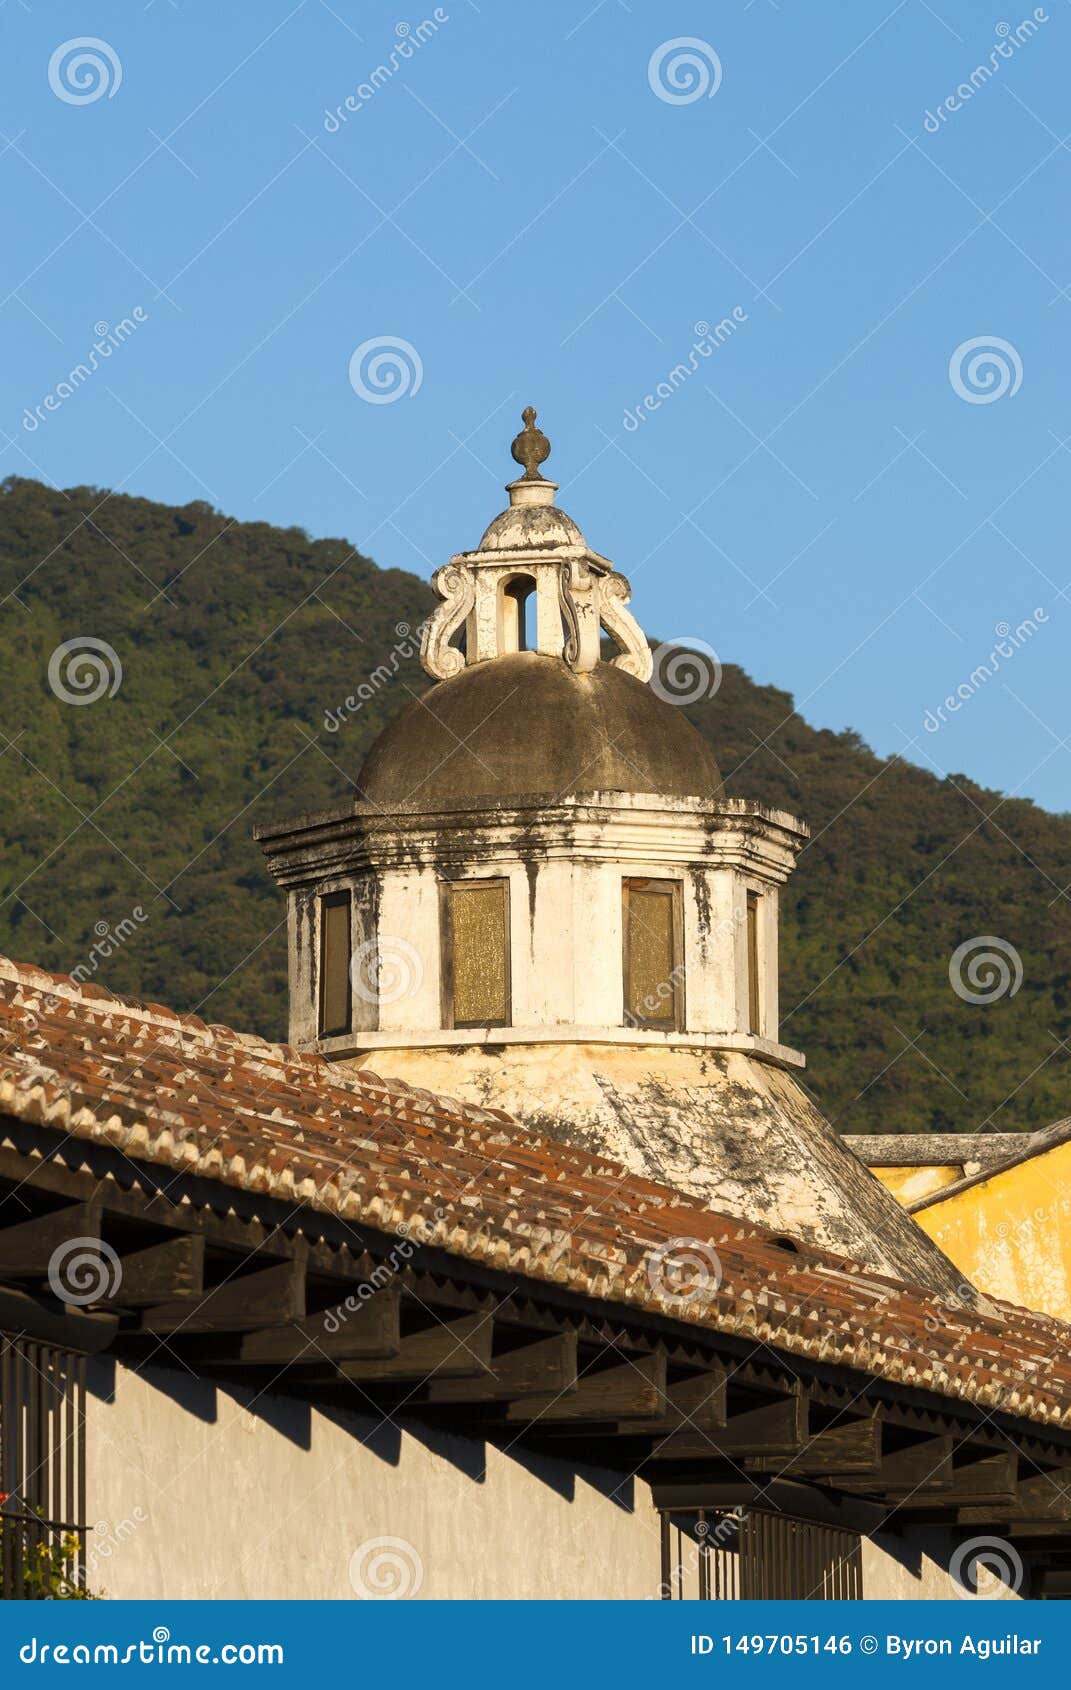 exterior detail of house in la antigua guatemala, wall and cupula colonial style in guatemala, central america.